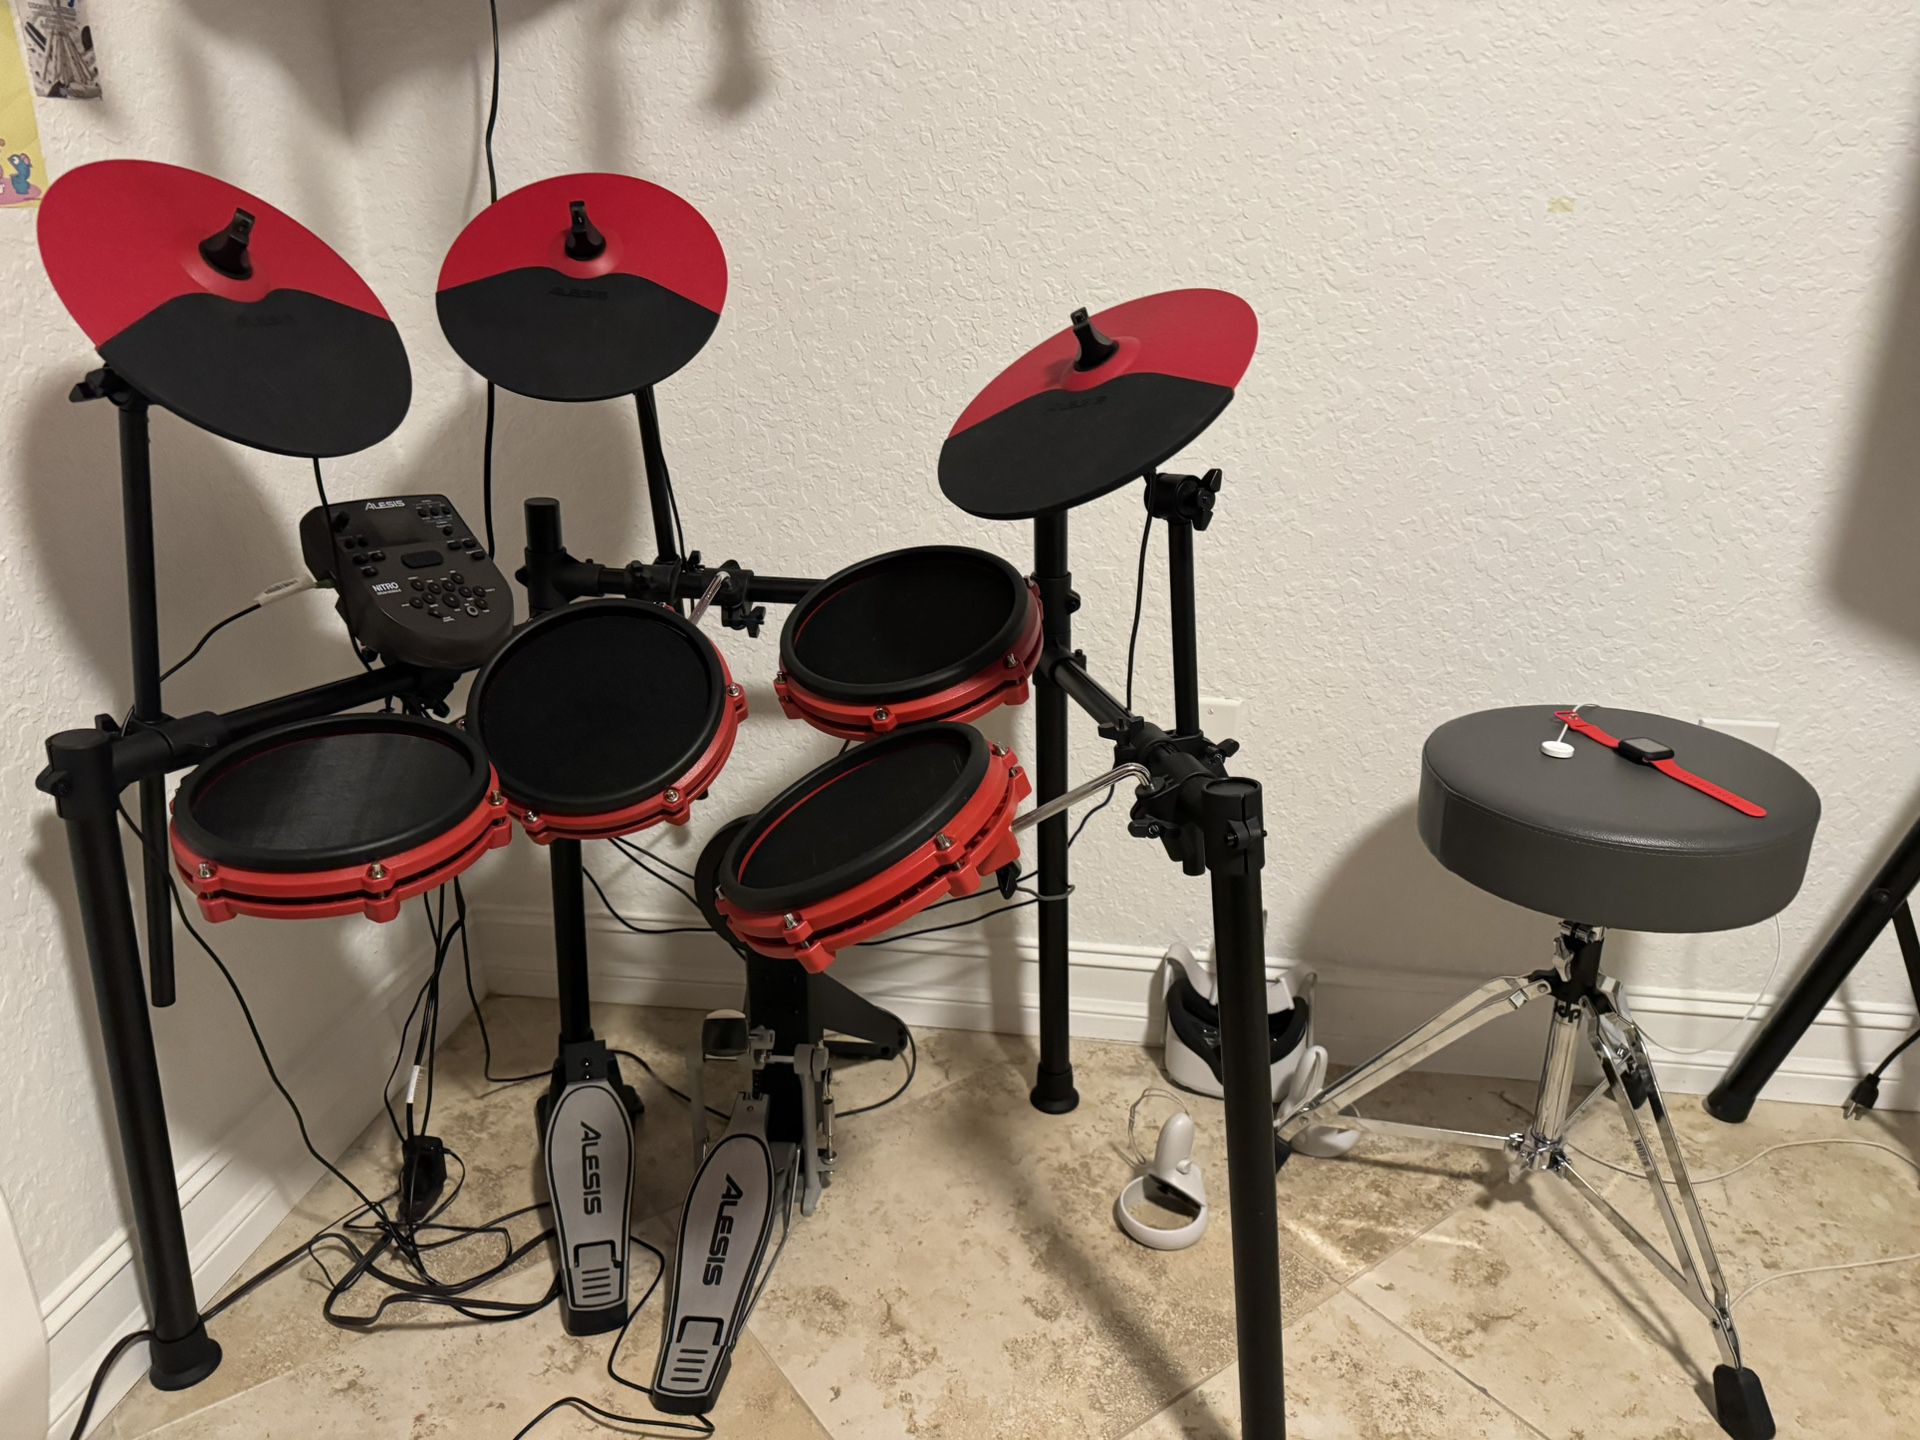  Alesis Nitro Max 8-Piece Electronic Drum Set With Bluetooth and BFD Sounds Red